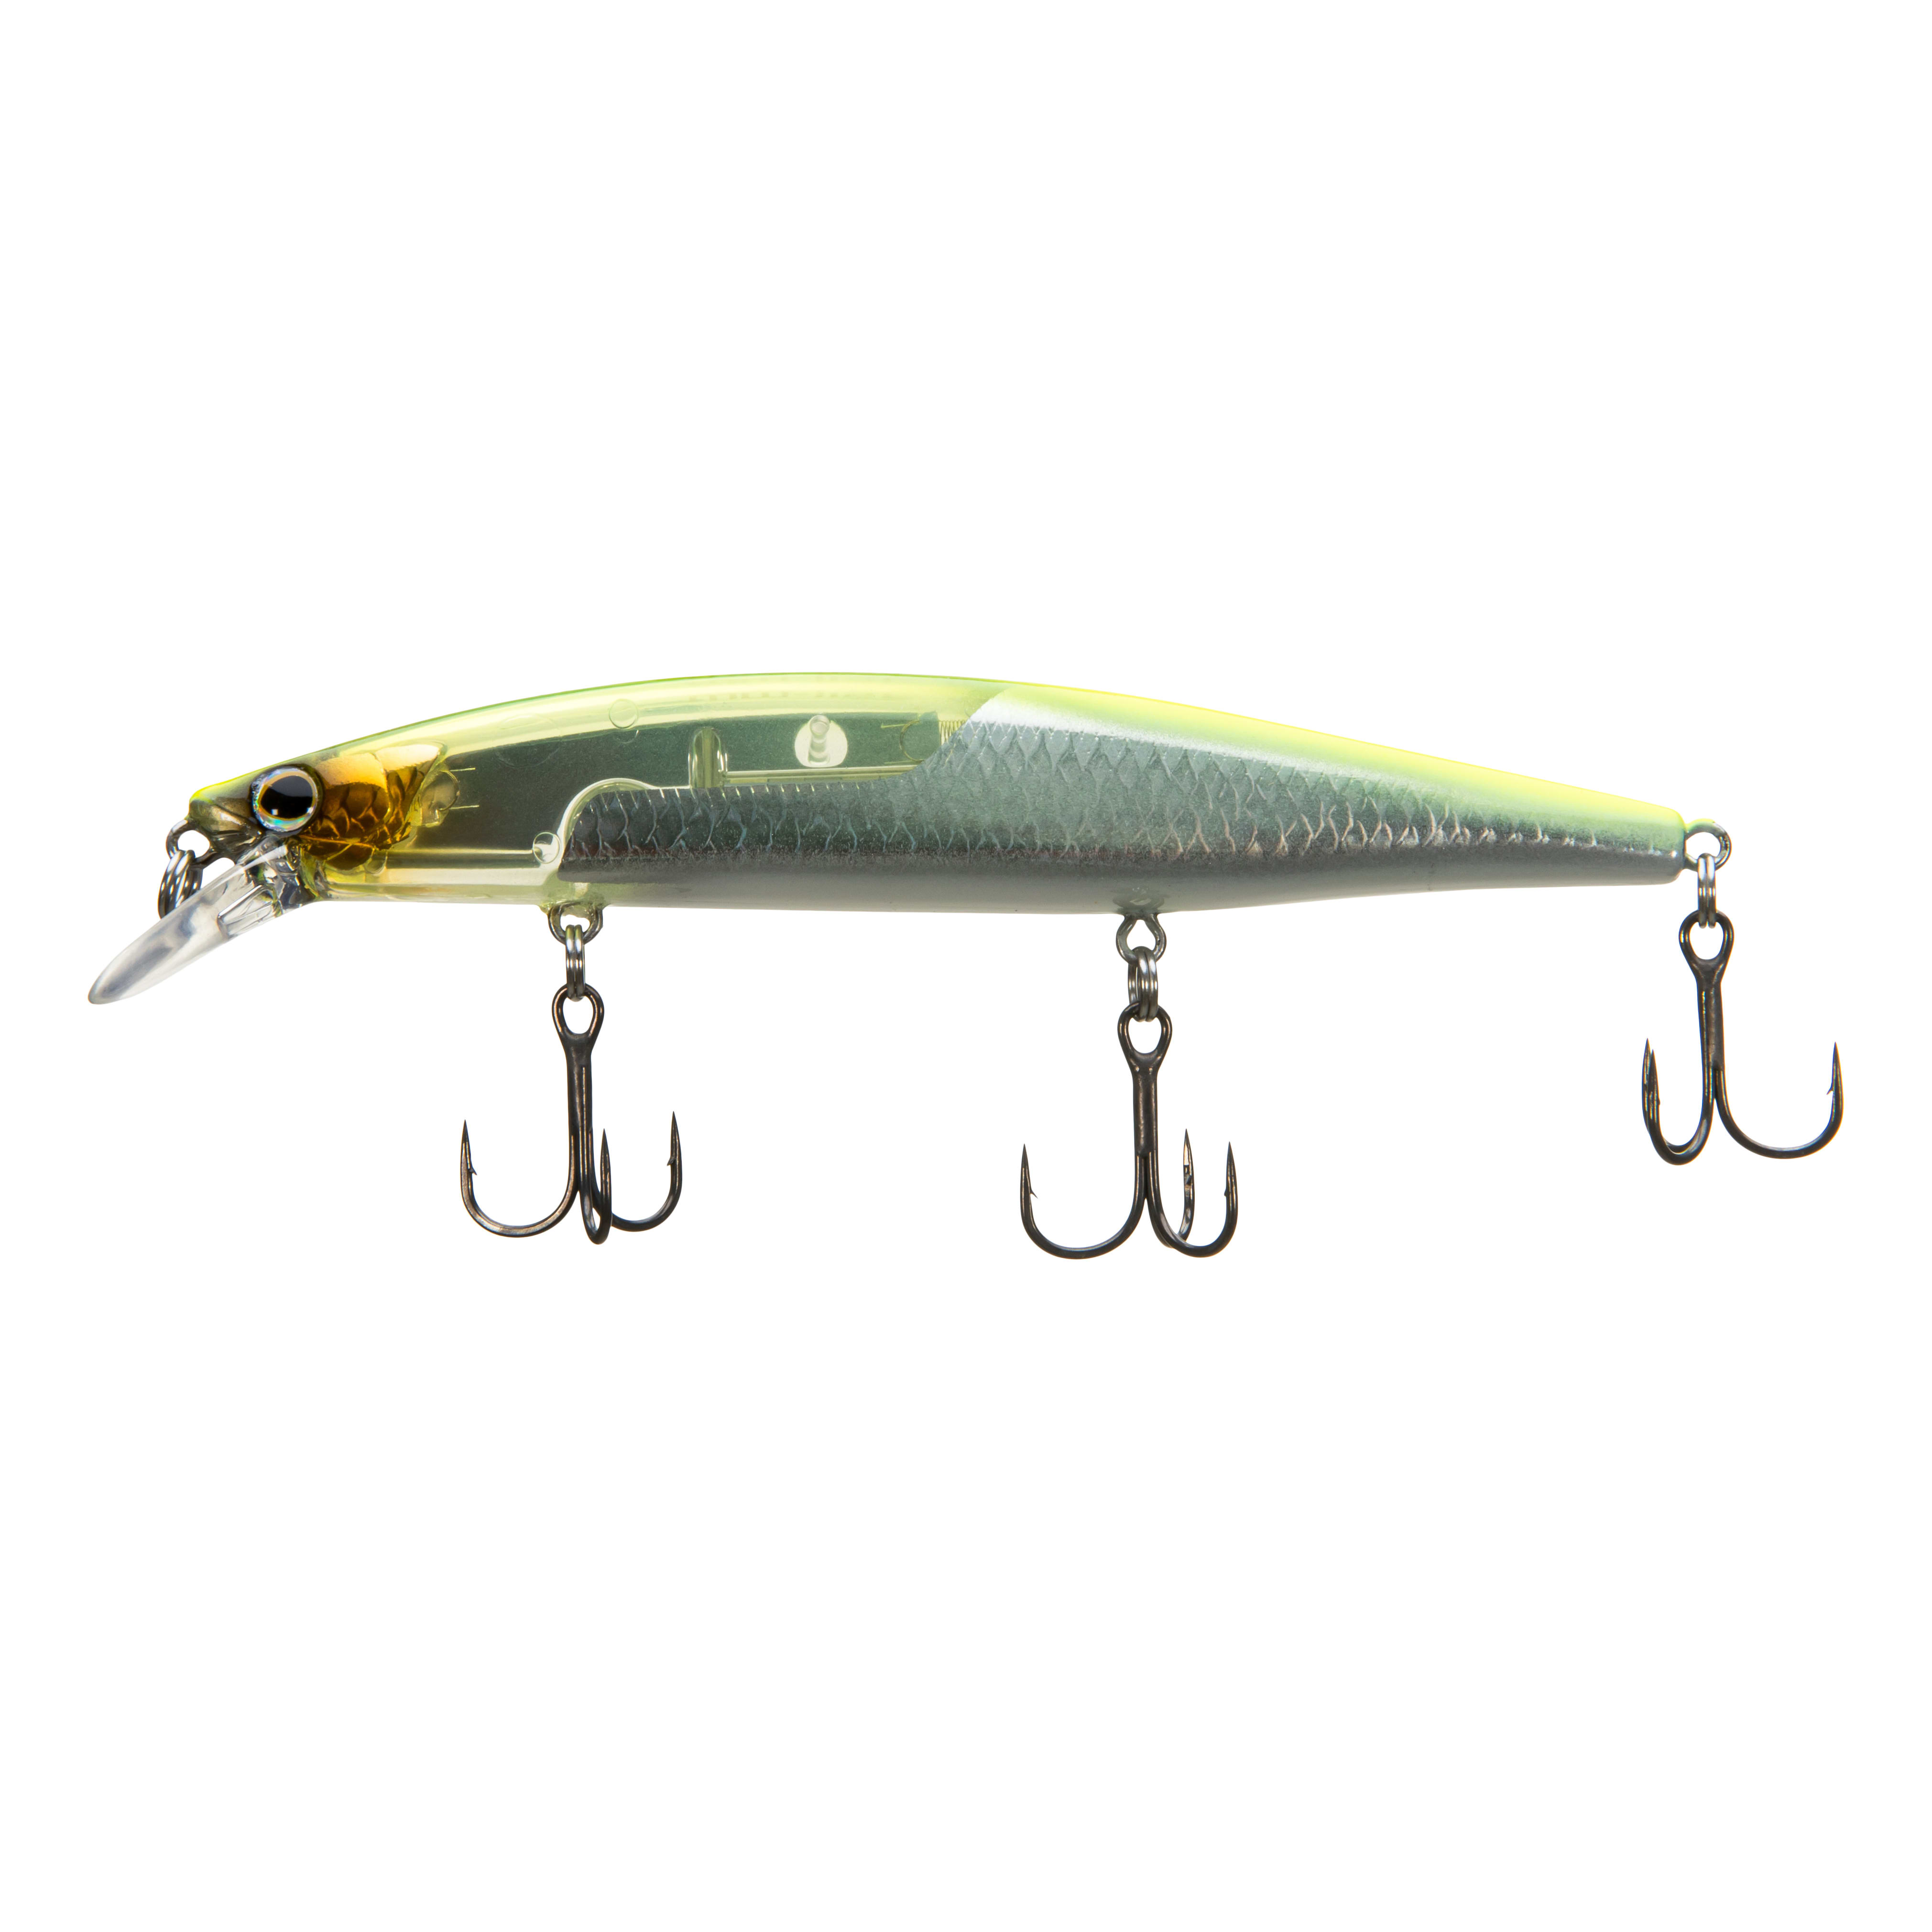 MuskieFIRST  Berger King Rig » Lures,Tackle, and Equipment